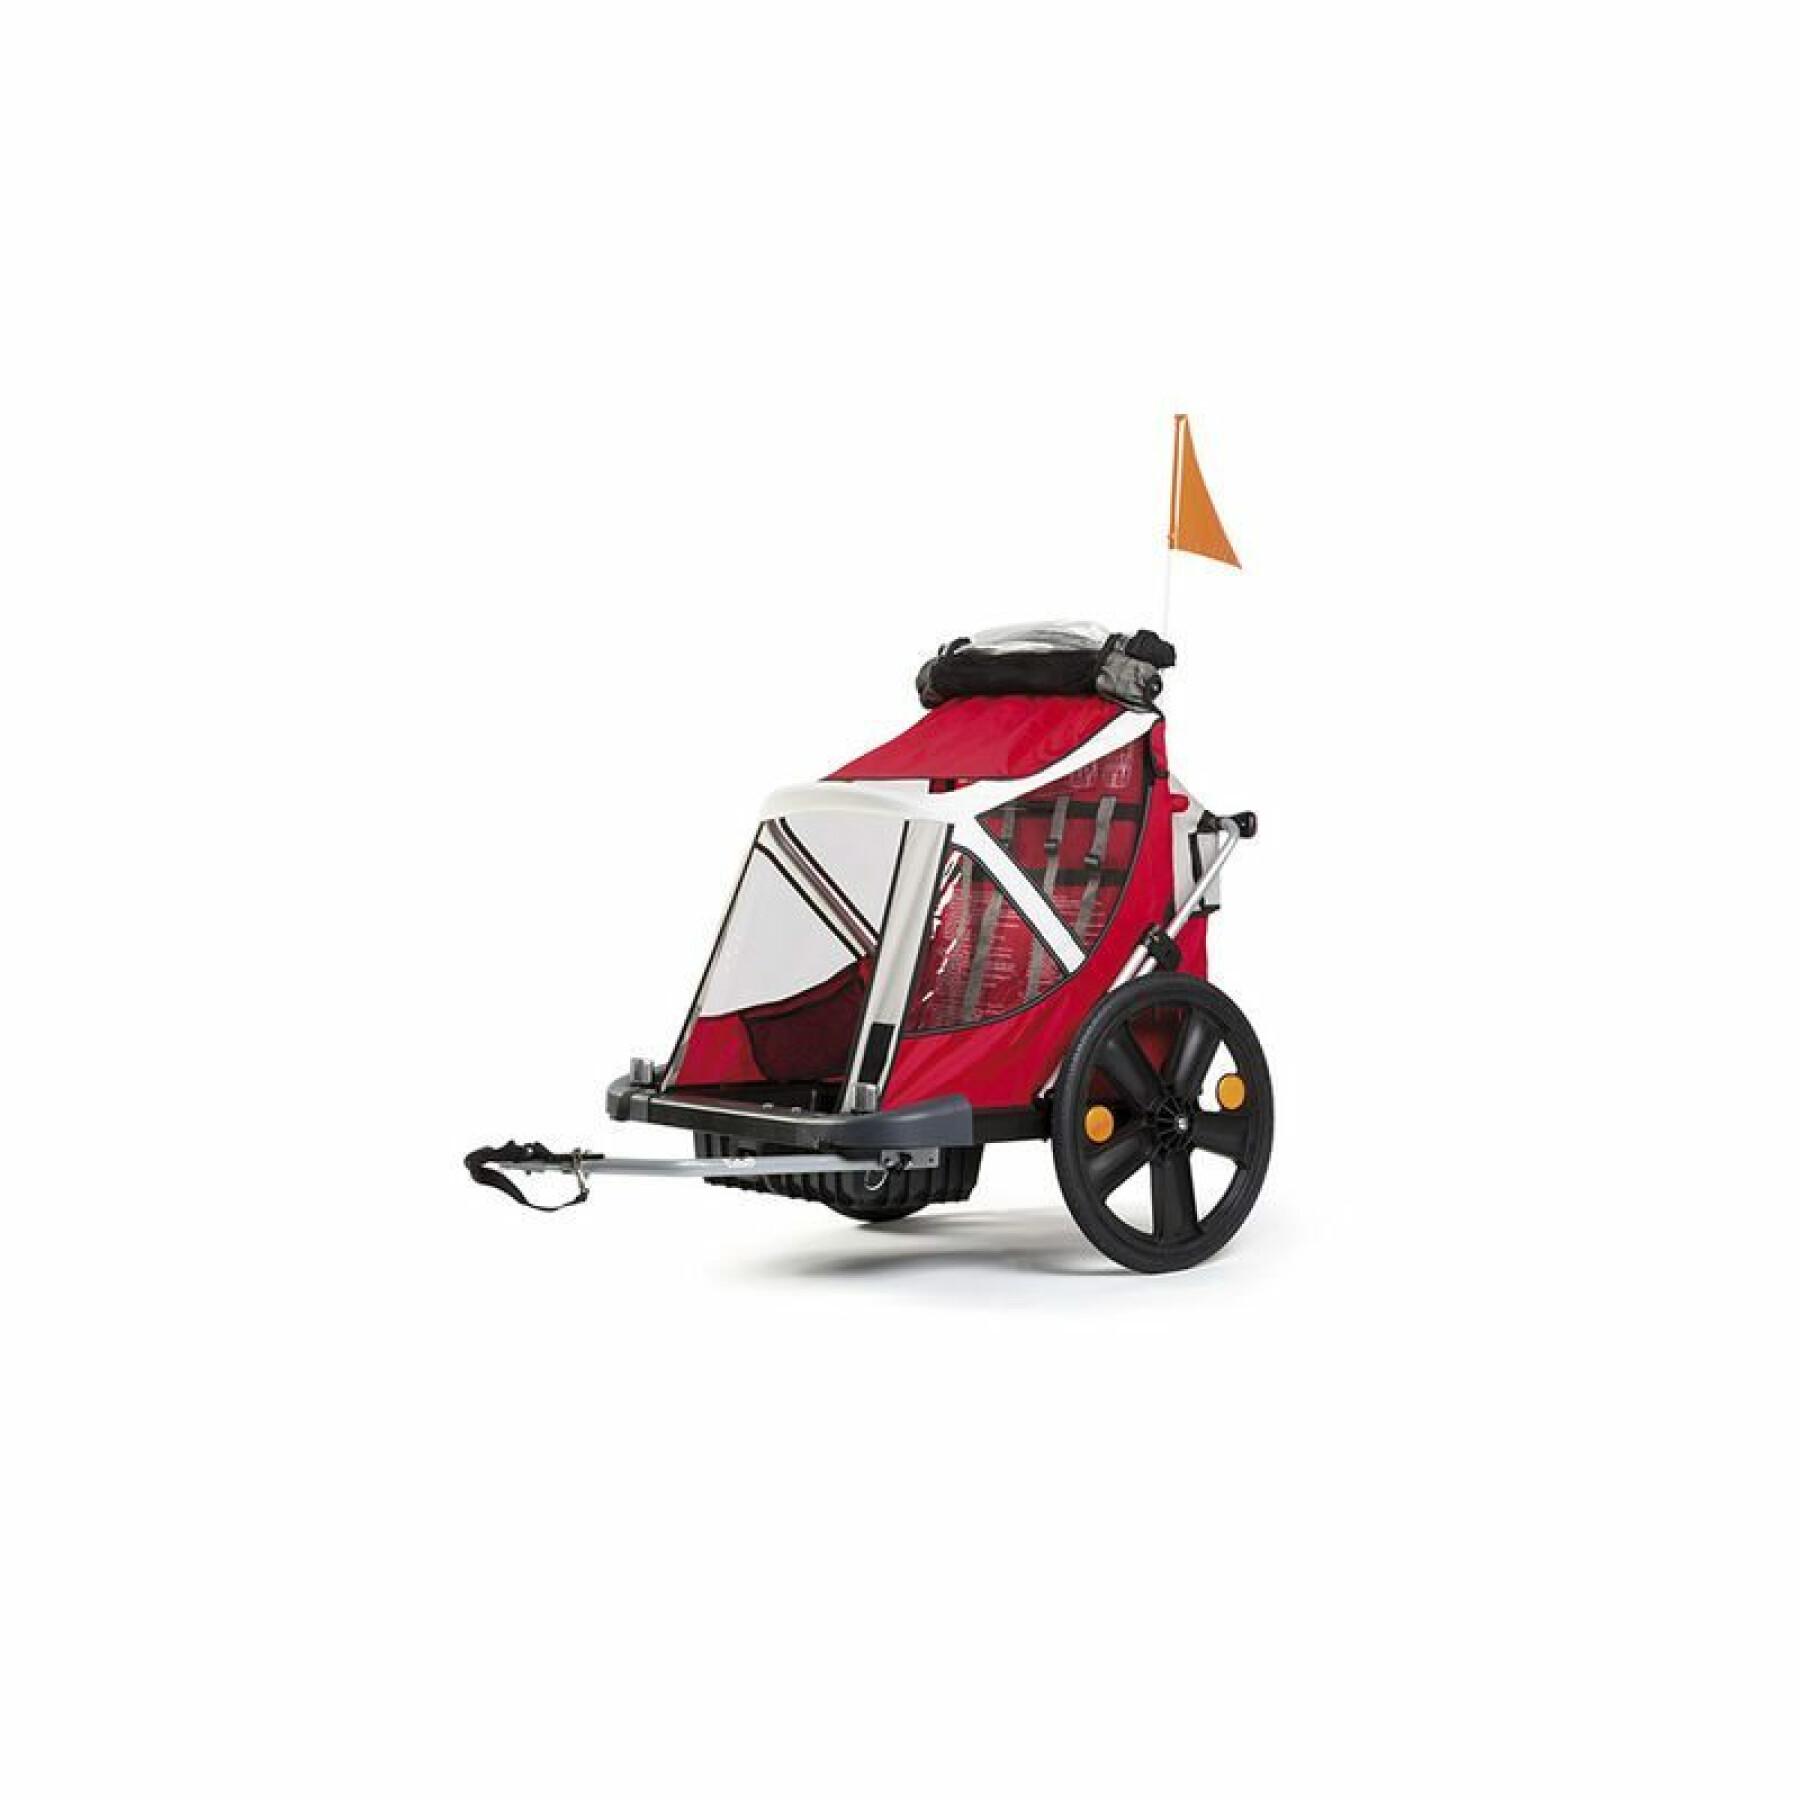 Two seater bicycle trailer with child brake Bellelli